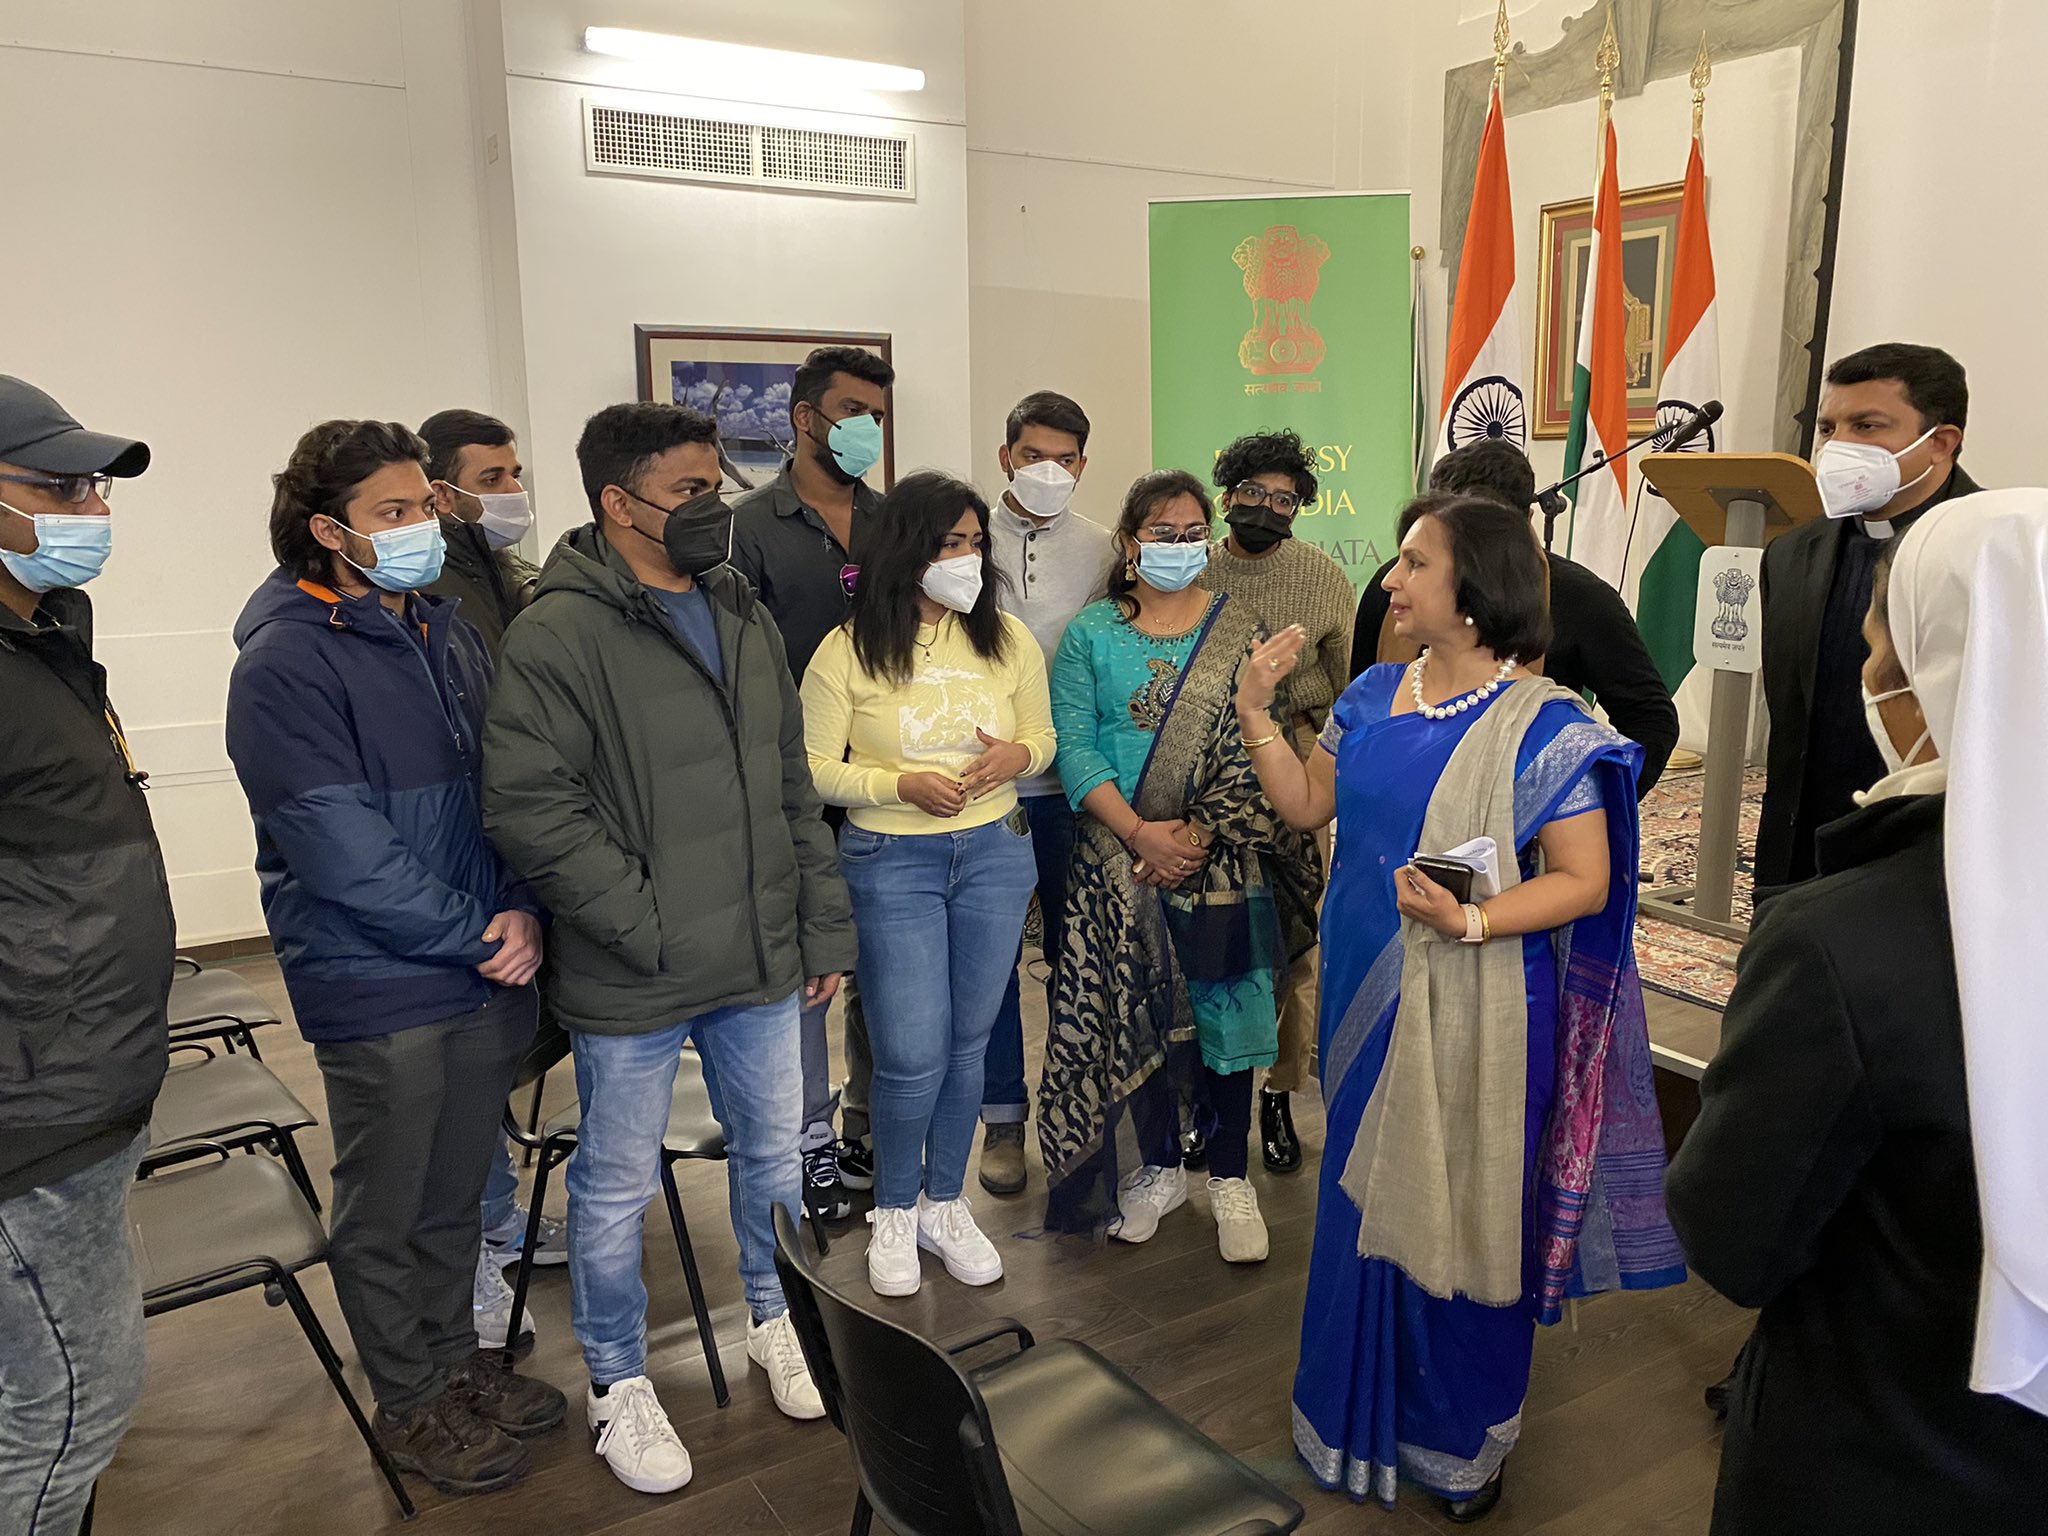 National Youth Day celebrated at Embassy of India, Rome